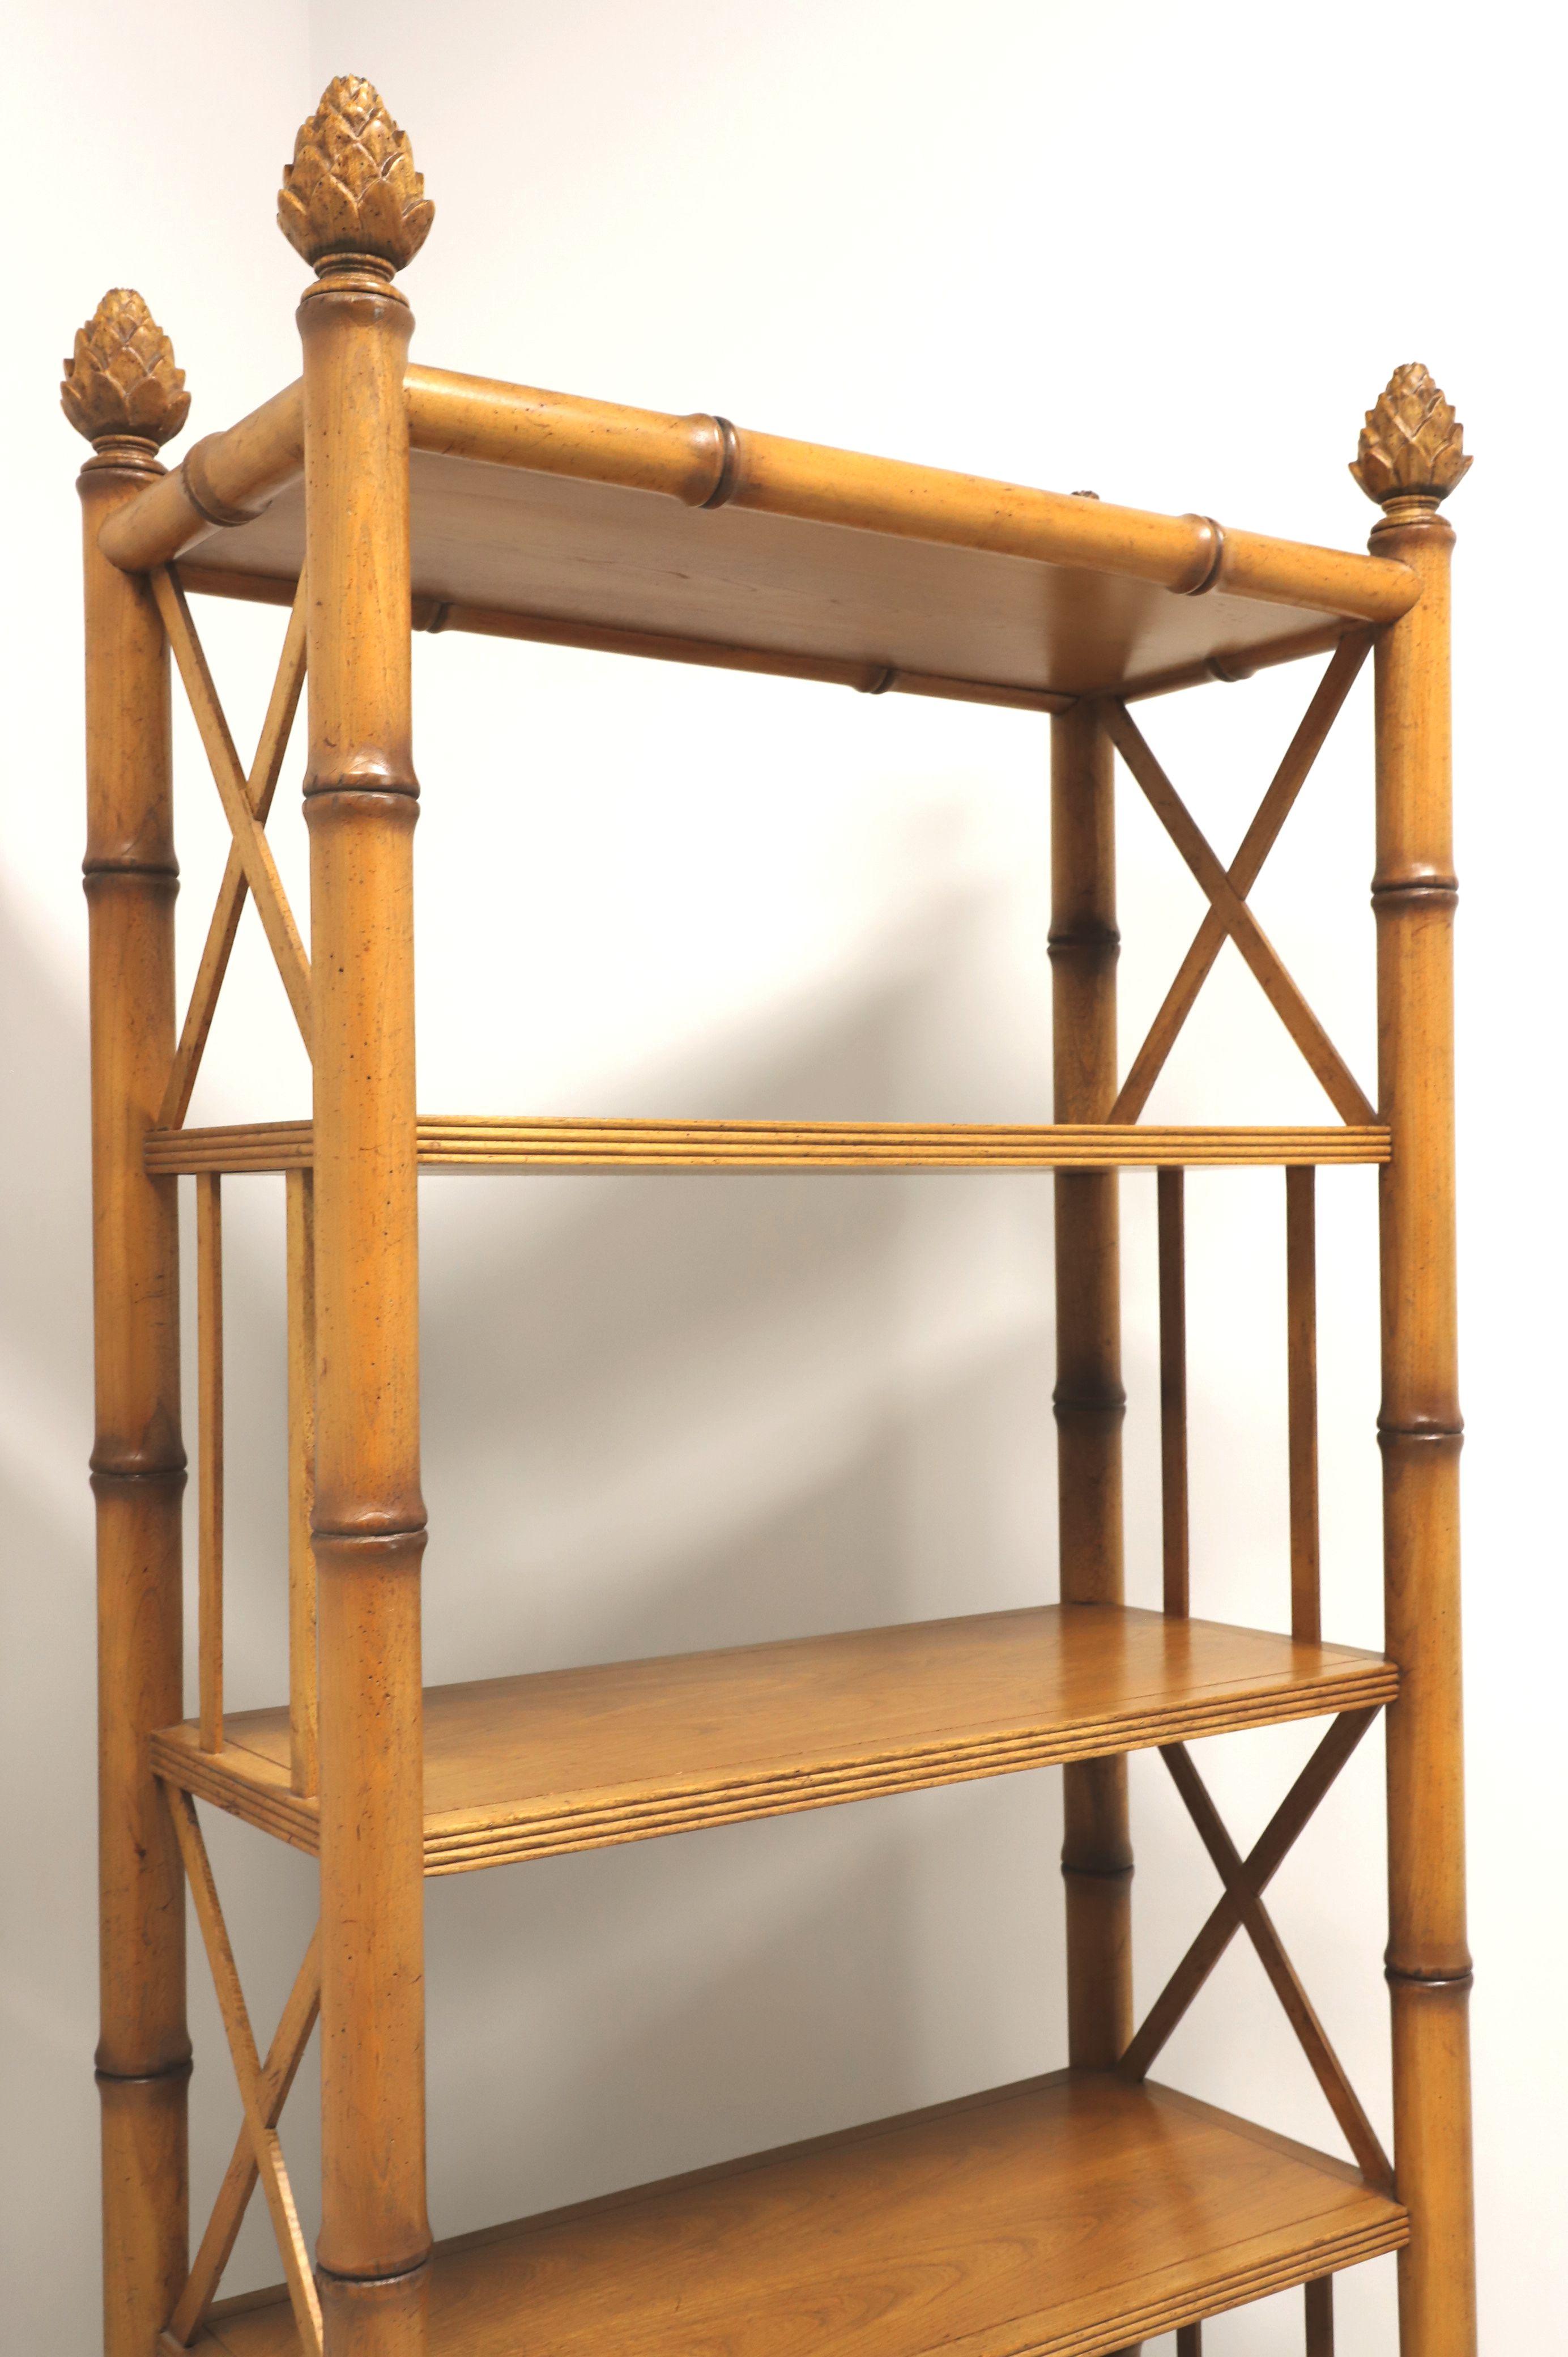 20th Century BAKER 1960's Faux Bamboo Etagere Display Shelving Unit - C